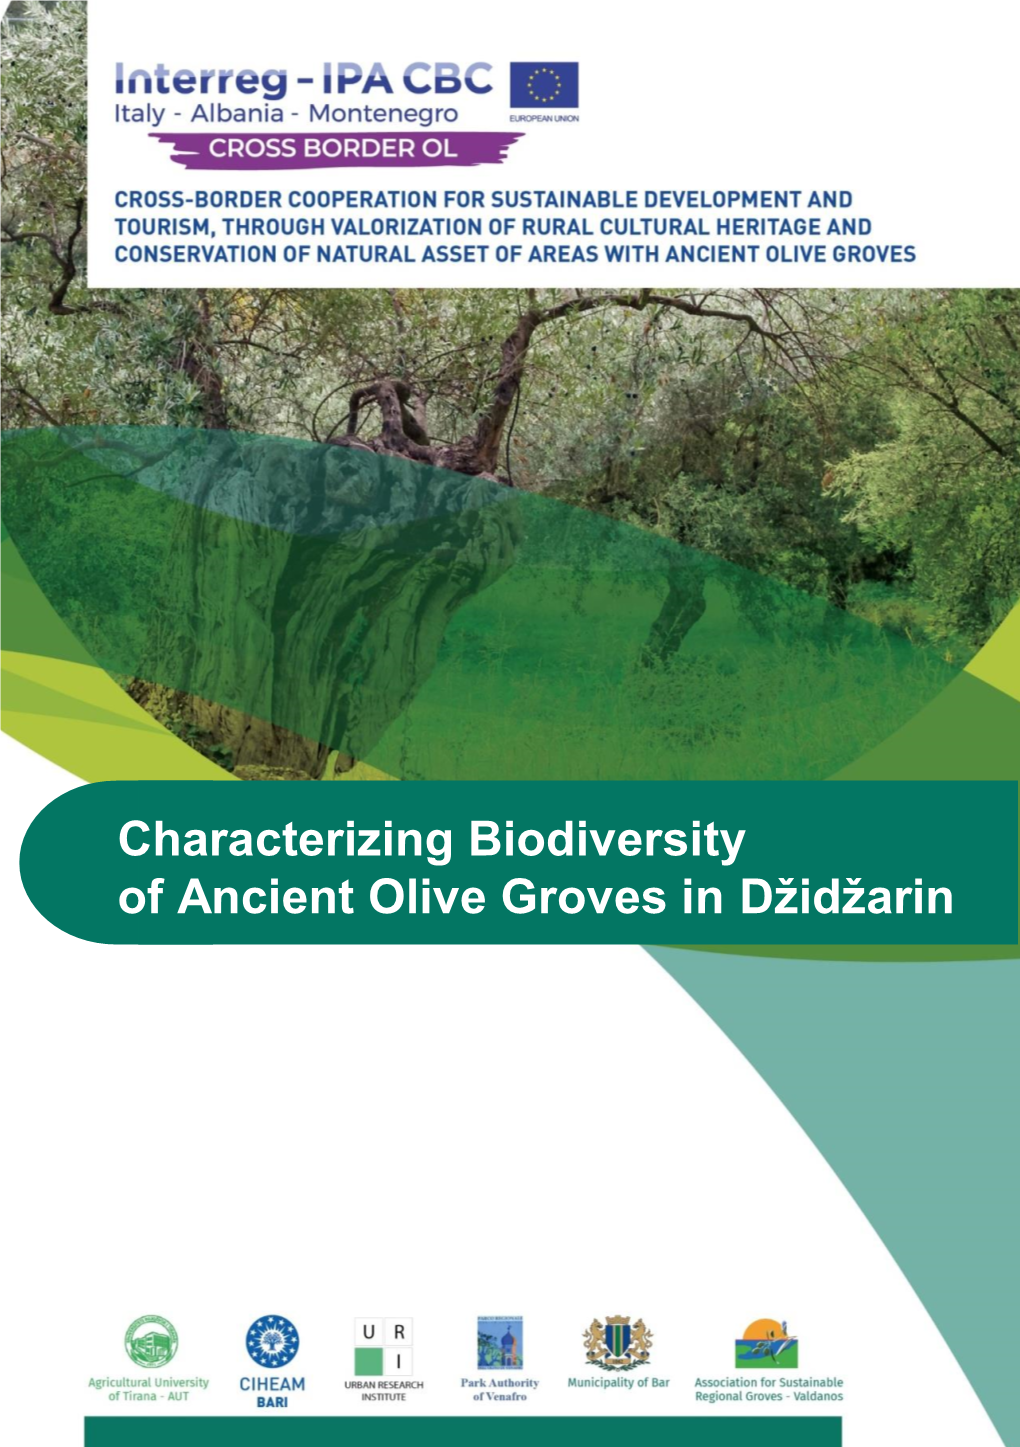 Characterizing Biodiversity of Ancient Olive Groves in Džidžarin